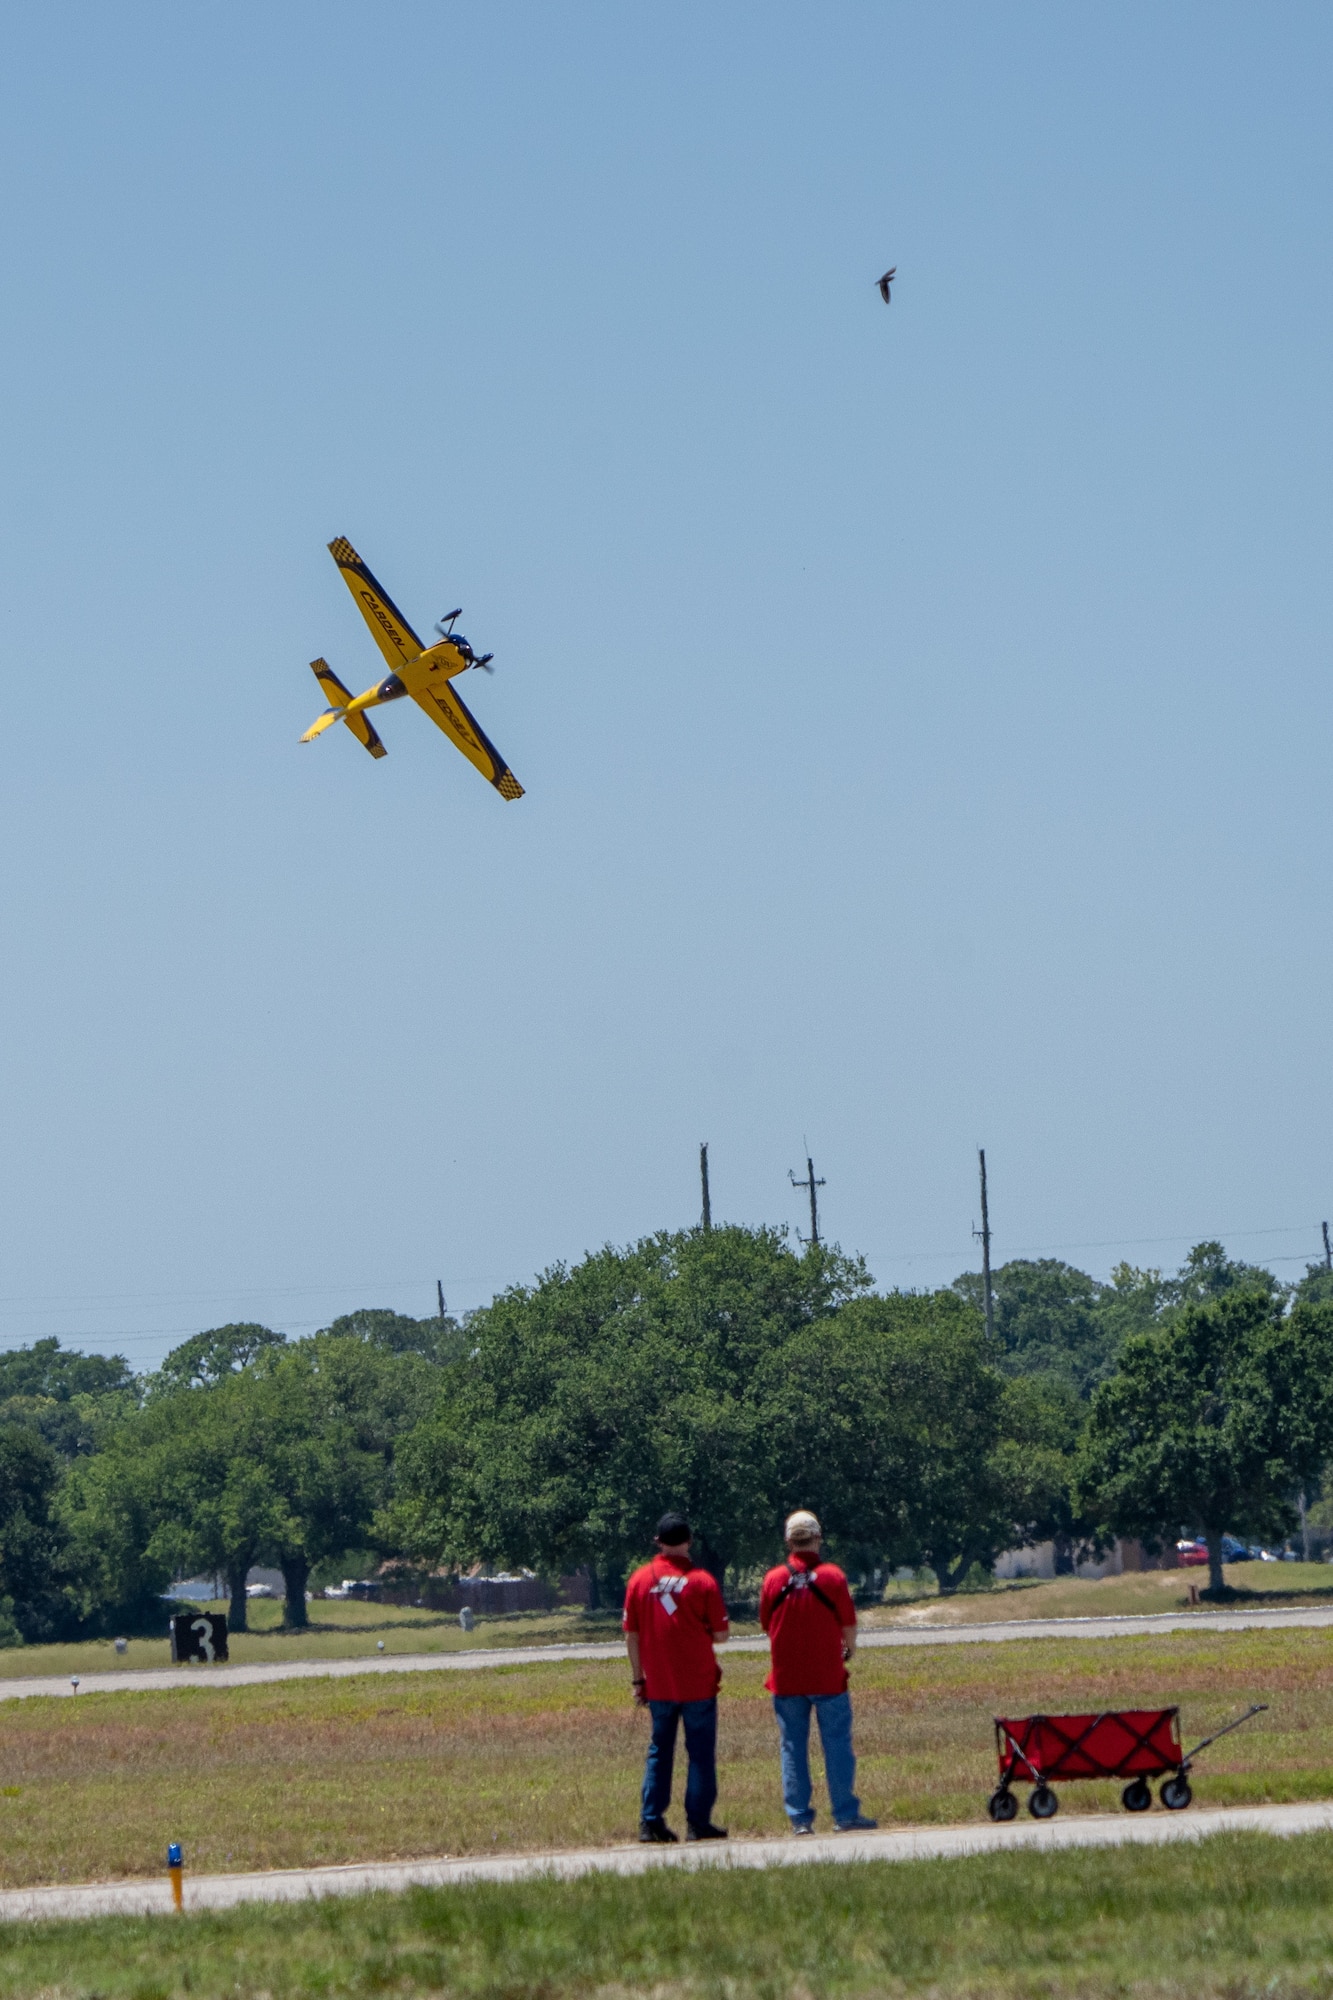 A Radio Controlled Plane is piloted during the 2023 Thunder Over the Sound Air and Space Show at Keesler Air Force Base, Mississippi, April 28, 2023. Thunder Over the Sound is a unique event where a military installation and its surrounding city jointly host an air show in two locations; Biloxi Beach and Keesler's flightline. (U.S. Air Force photo by Airman 1st Class Trenten Walters)